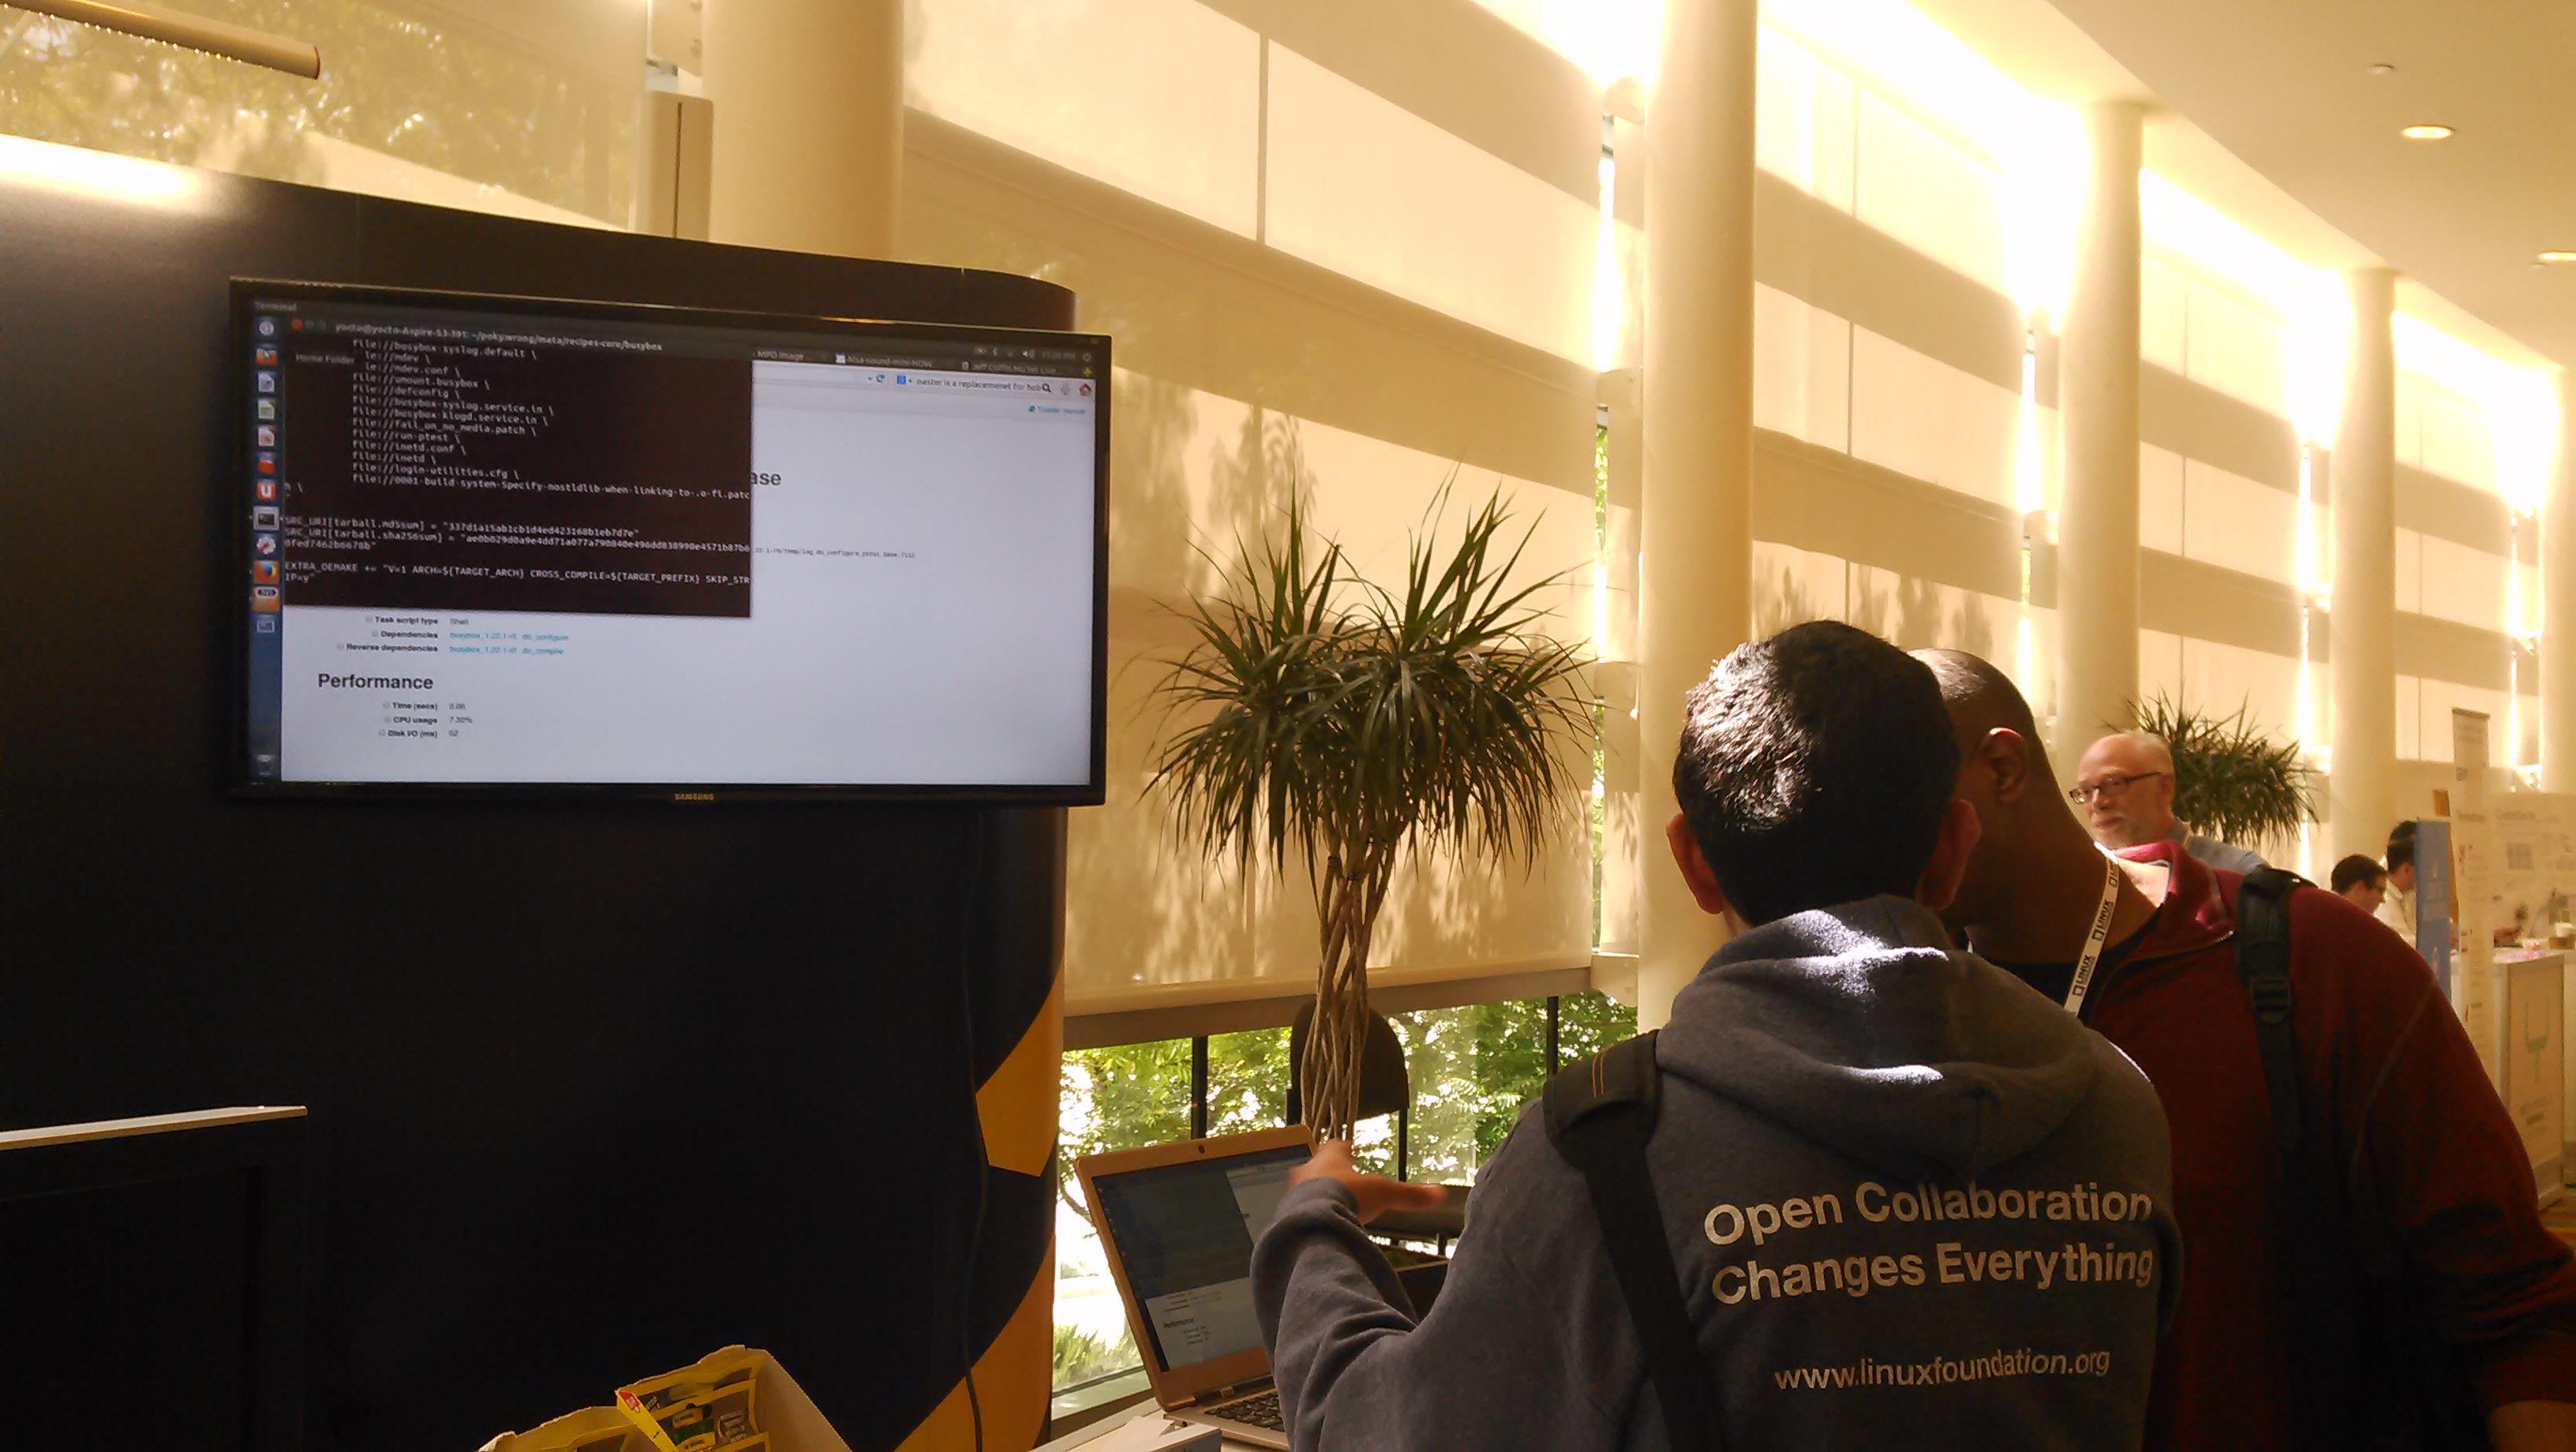 An OpenEmbedded maintainer runs an impromptu training session at the Yocto Project booth during an Embedded Linux conference.